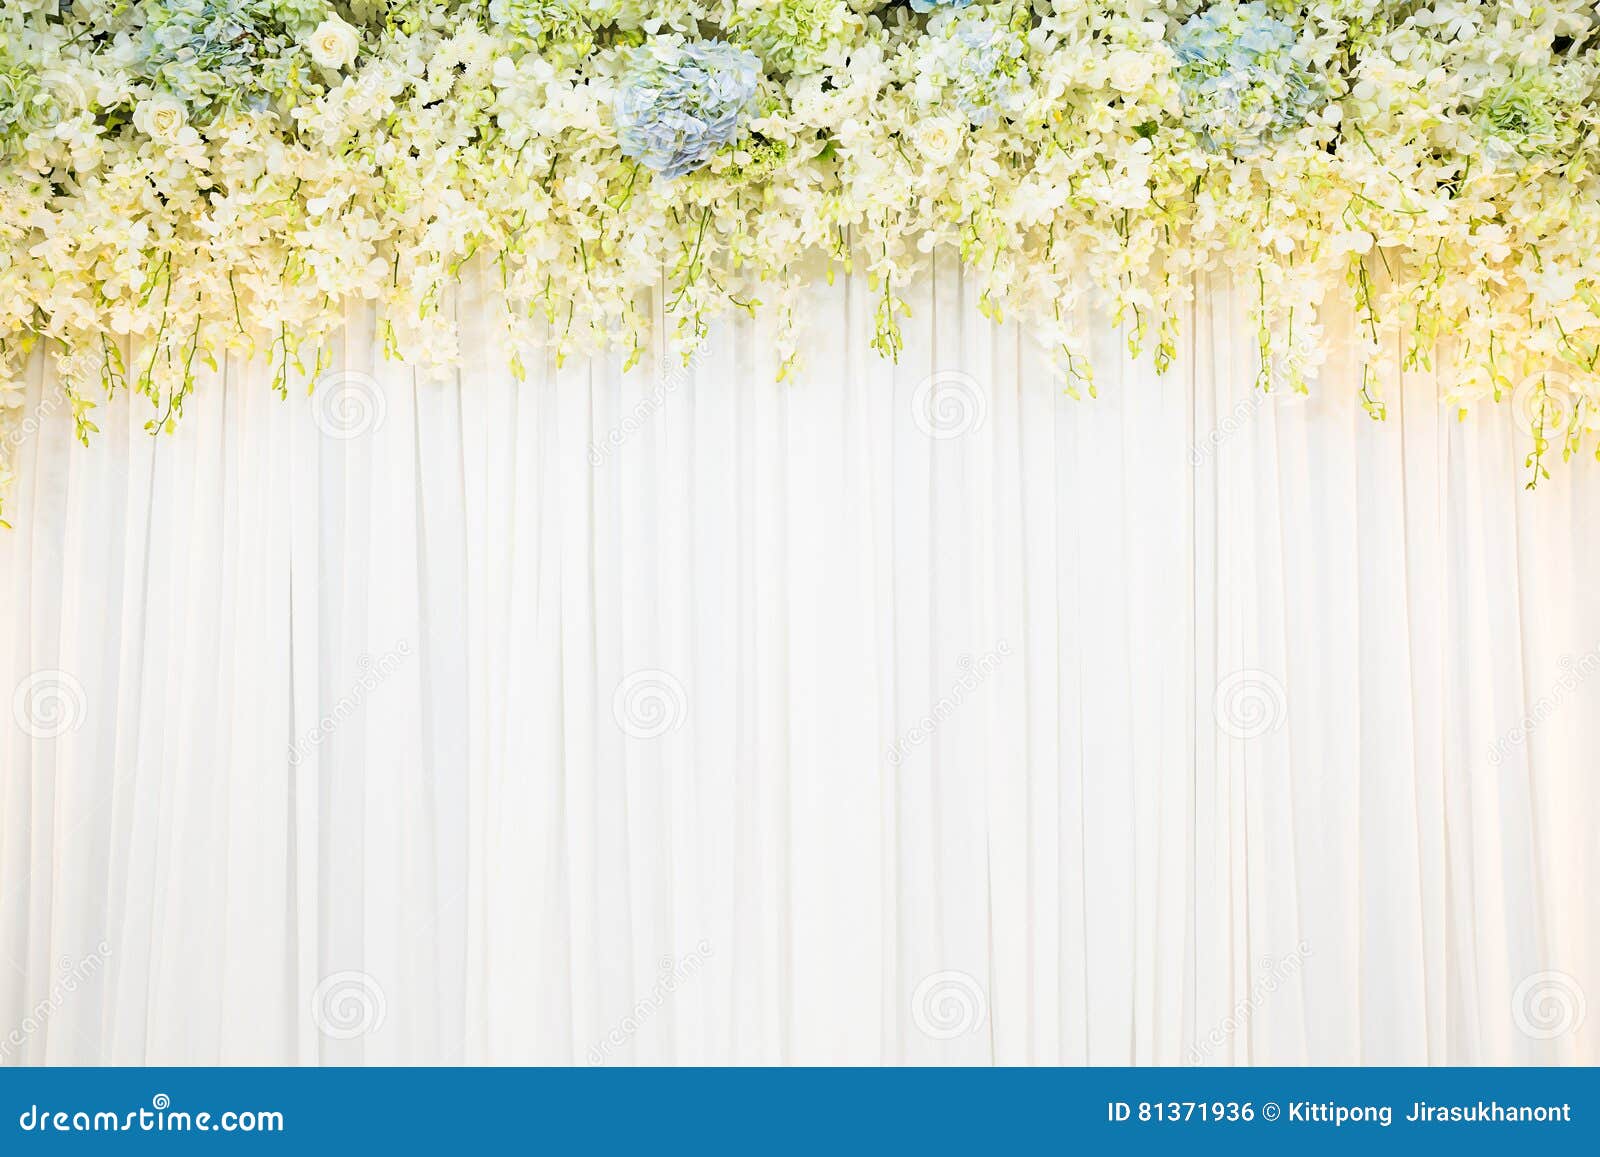 Flora Backdrop with White Cloth Stock Photo - Image of nature, leaf ...